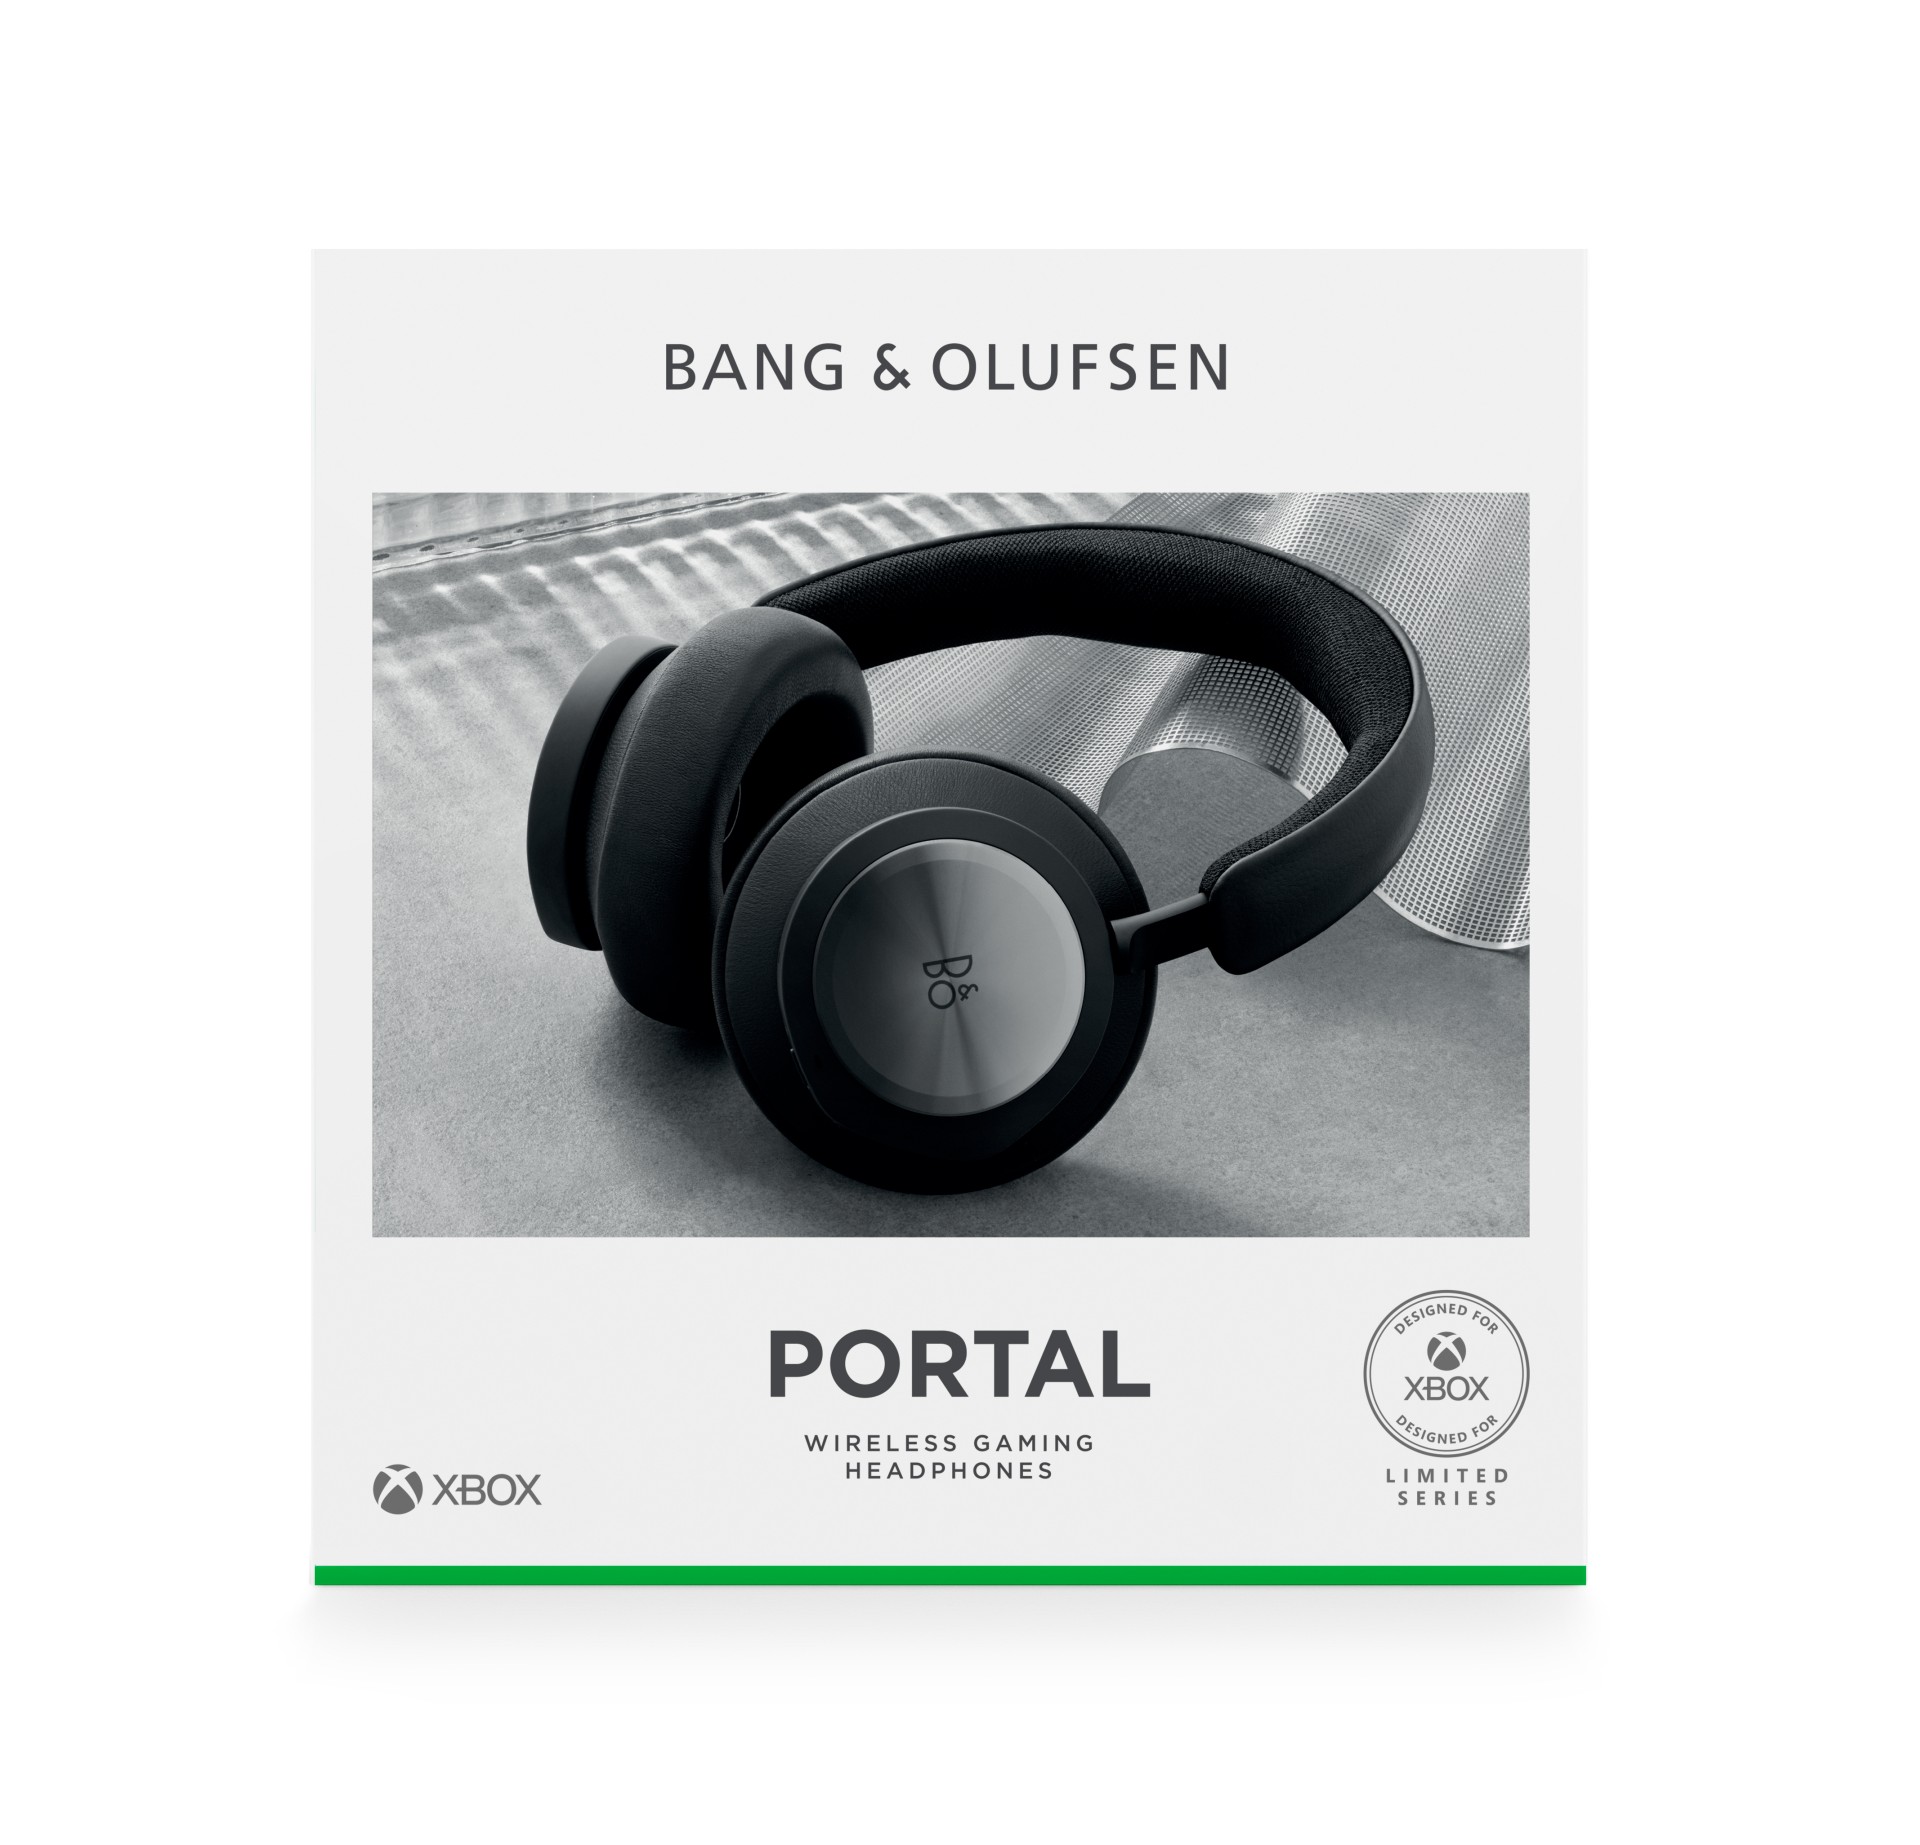 BANG AND OLUFSEN AUDIO CONTROLLER RPC ISSUE Beoplay-Portal_Black_Packaging_Front_JPG.jpg